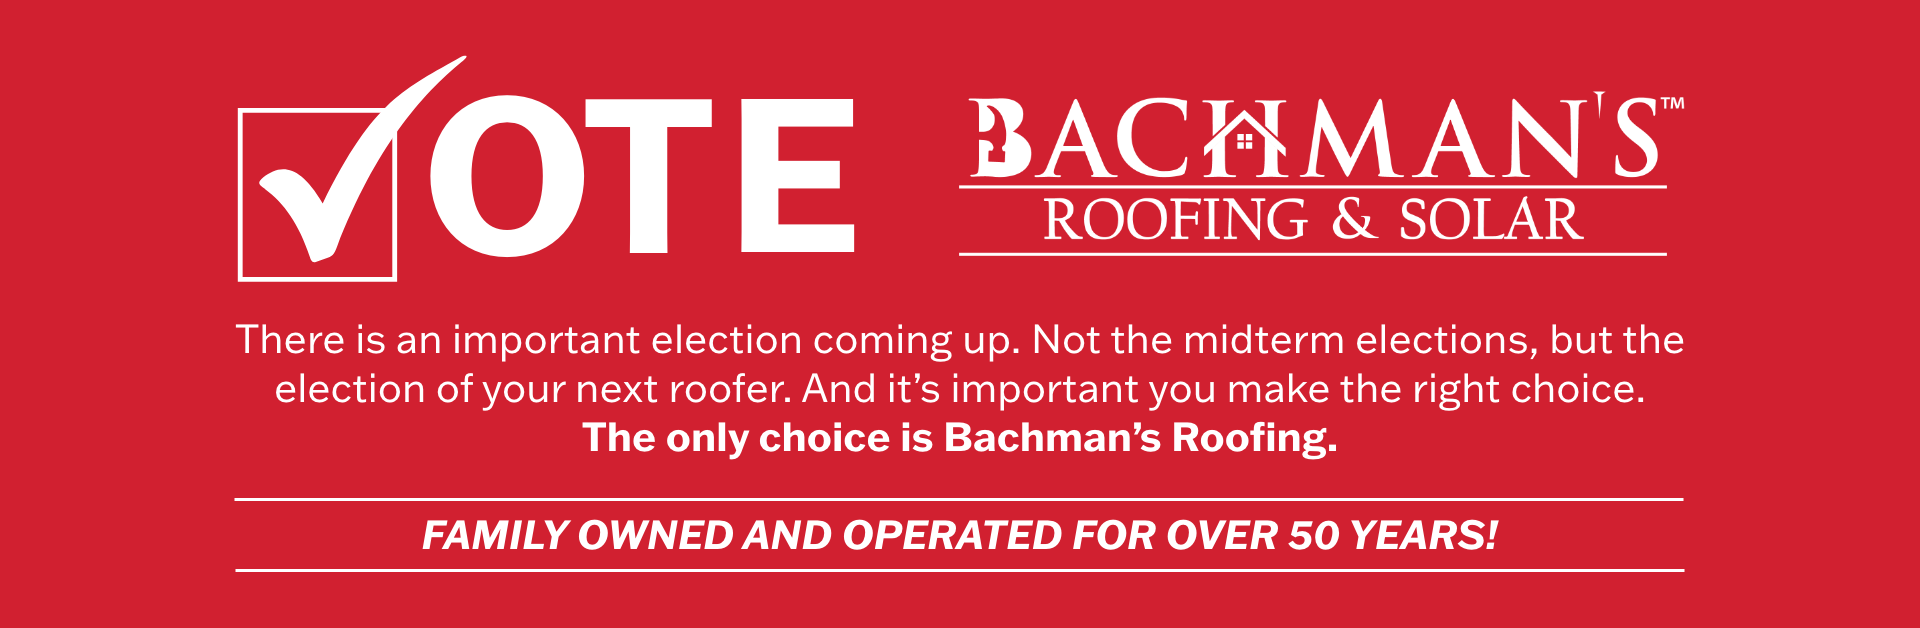 bachman's roofing & solar